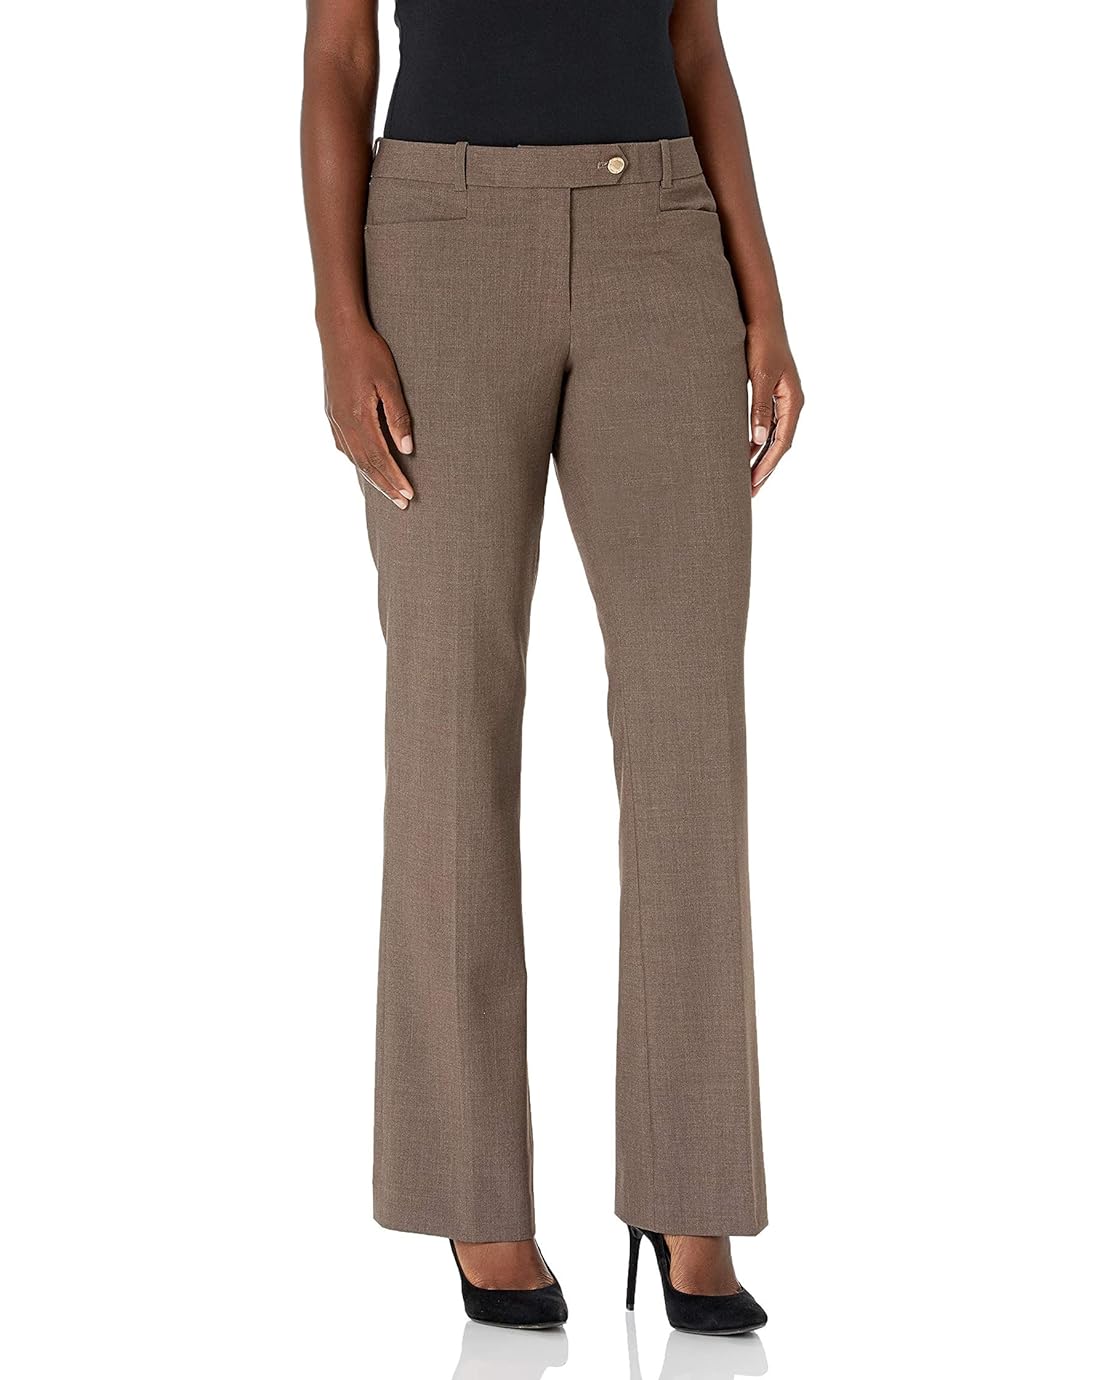 Calvin Klein Womens Modern Fit Lux Pant with Belt